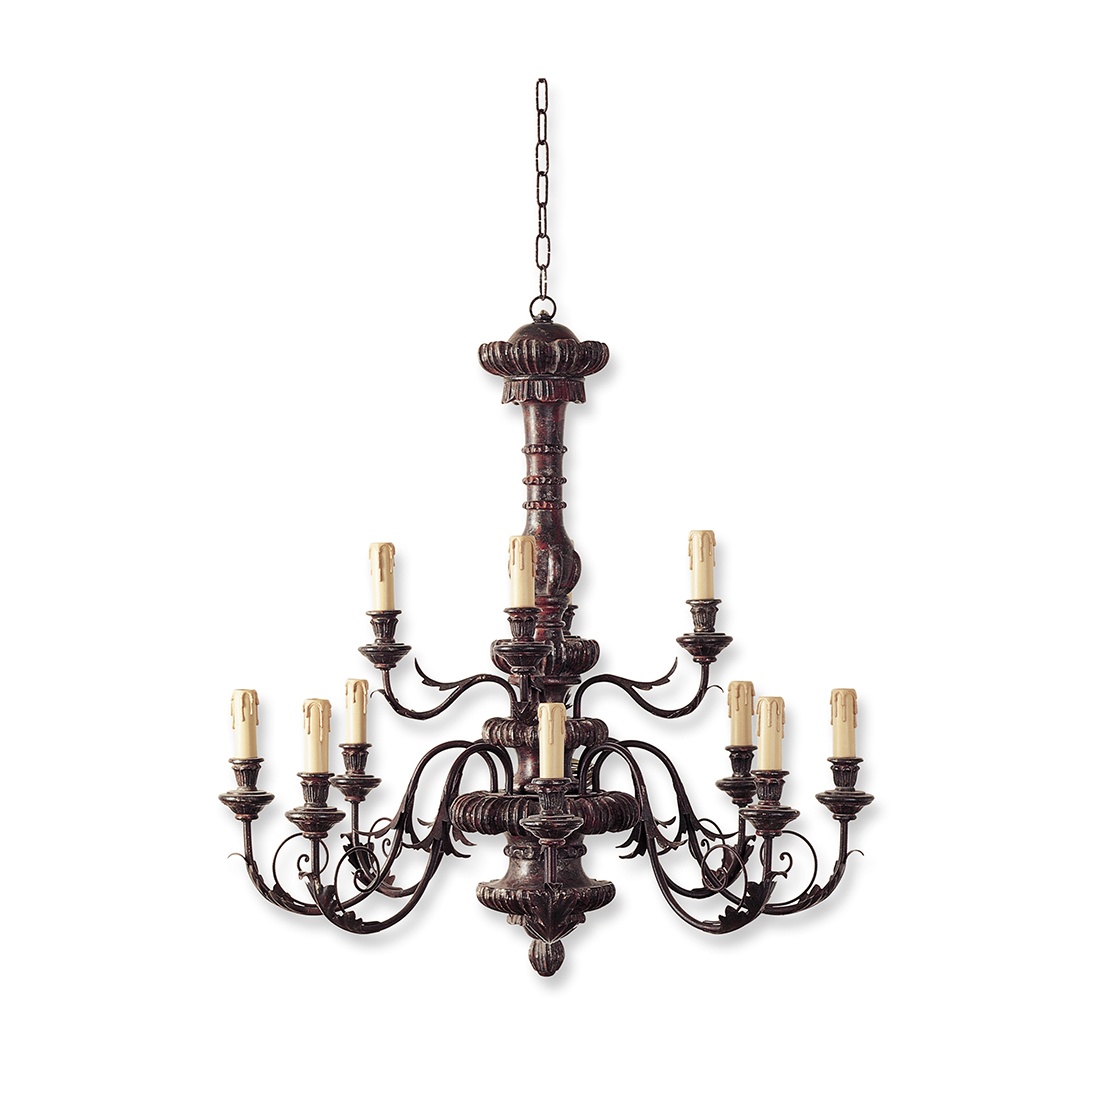 Chatsworth chandelier in Oxidised real silver - Beaumont & Fletcher